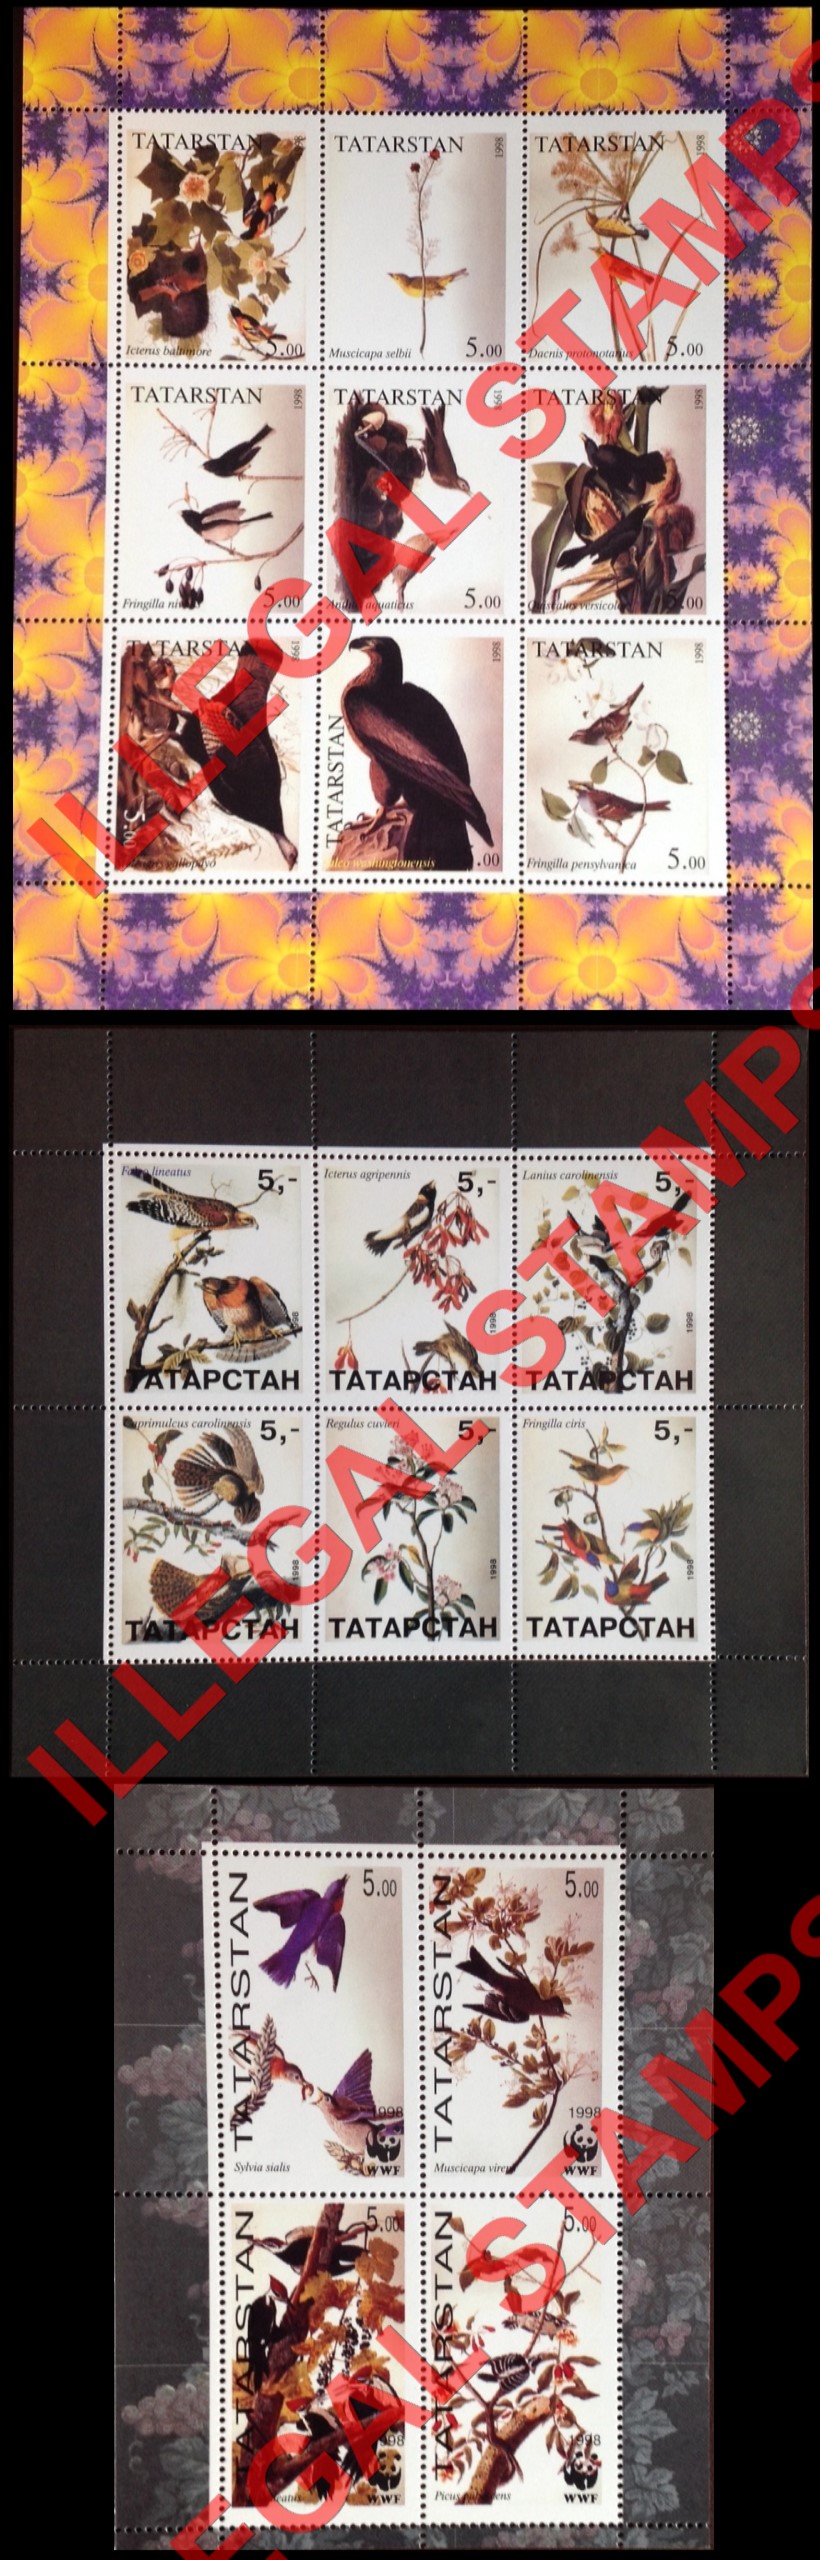 Republic of Tatarstan 1998 Counterfeit Illegal Stamps (Part 2)